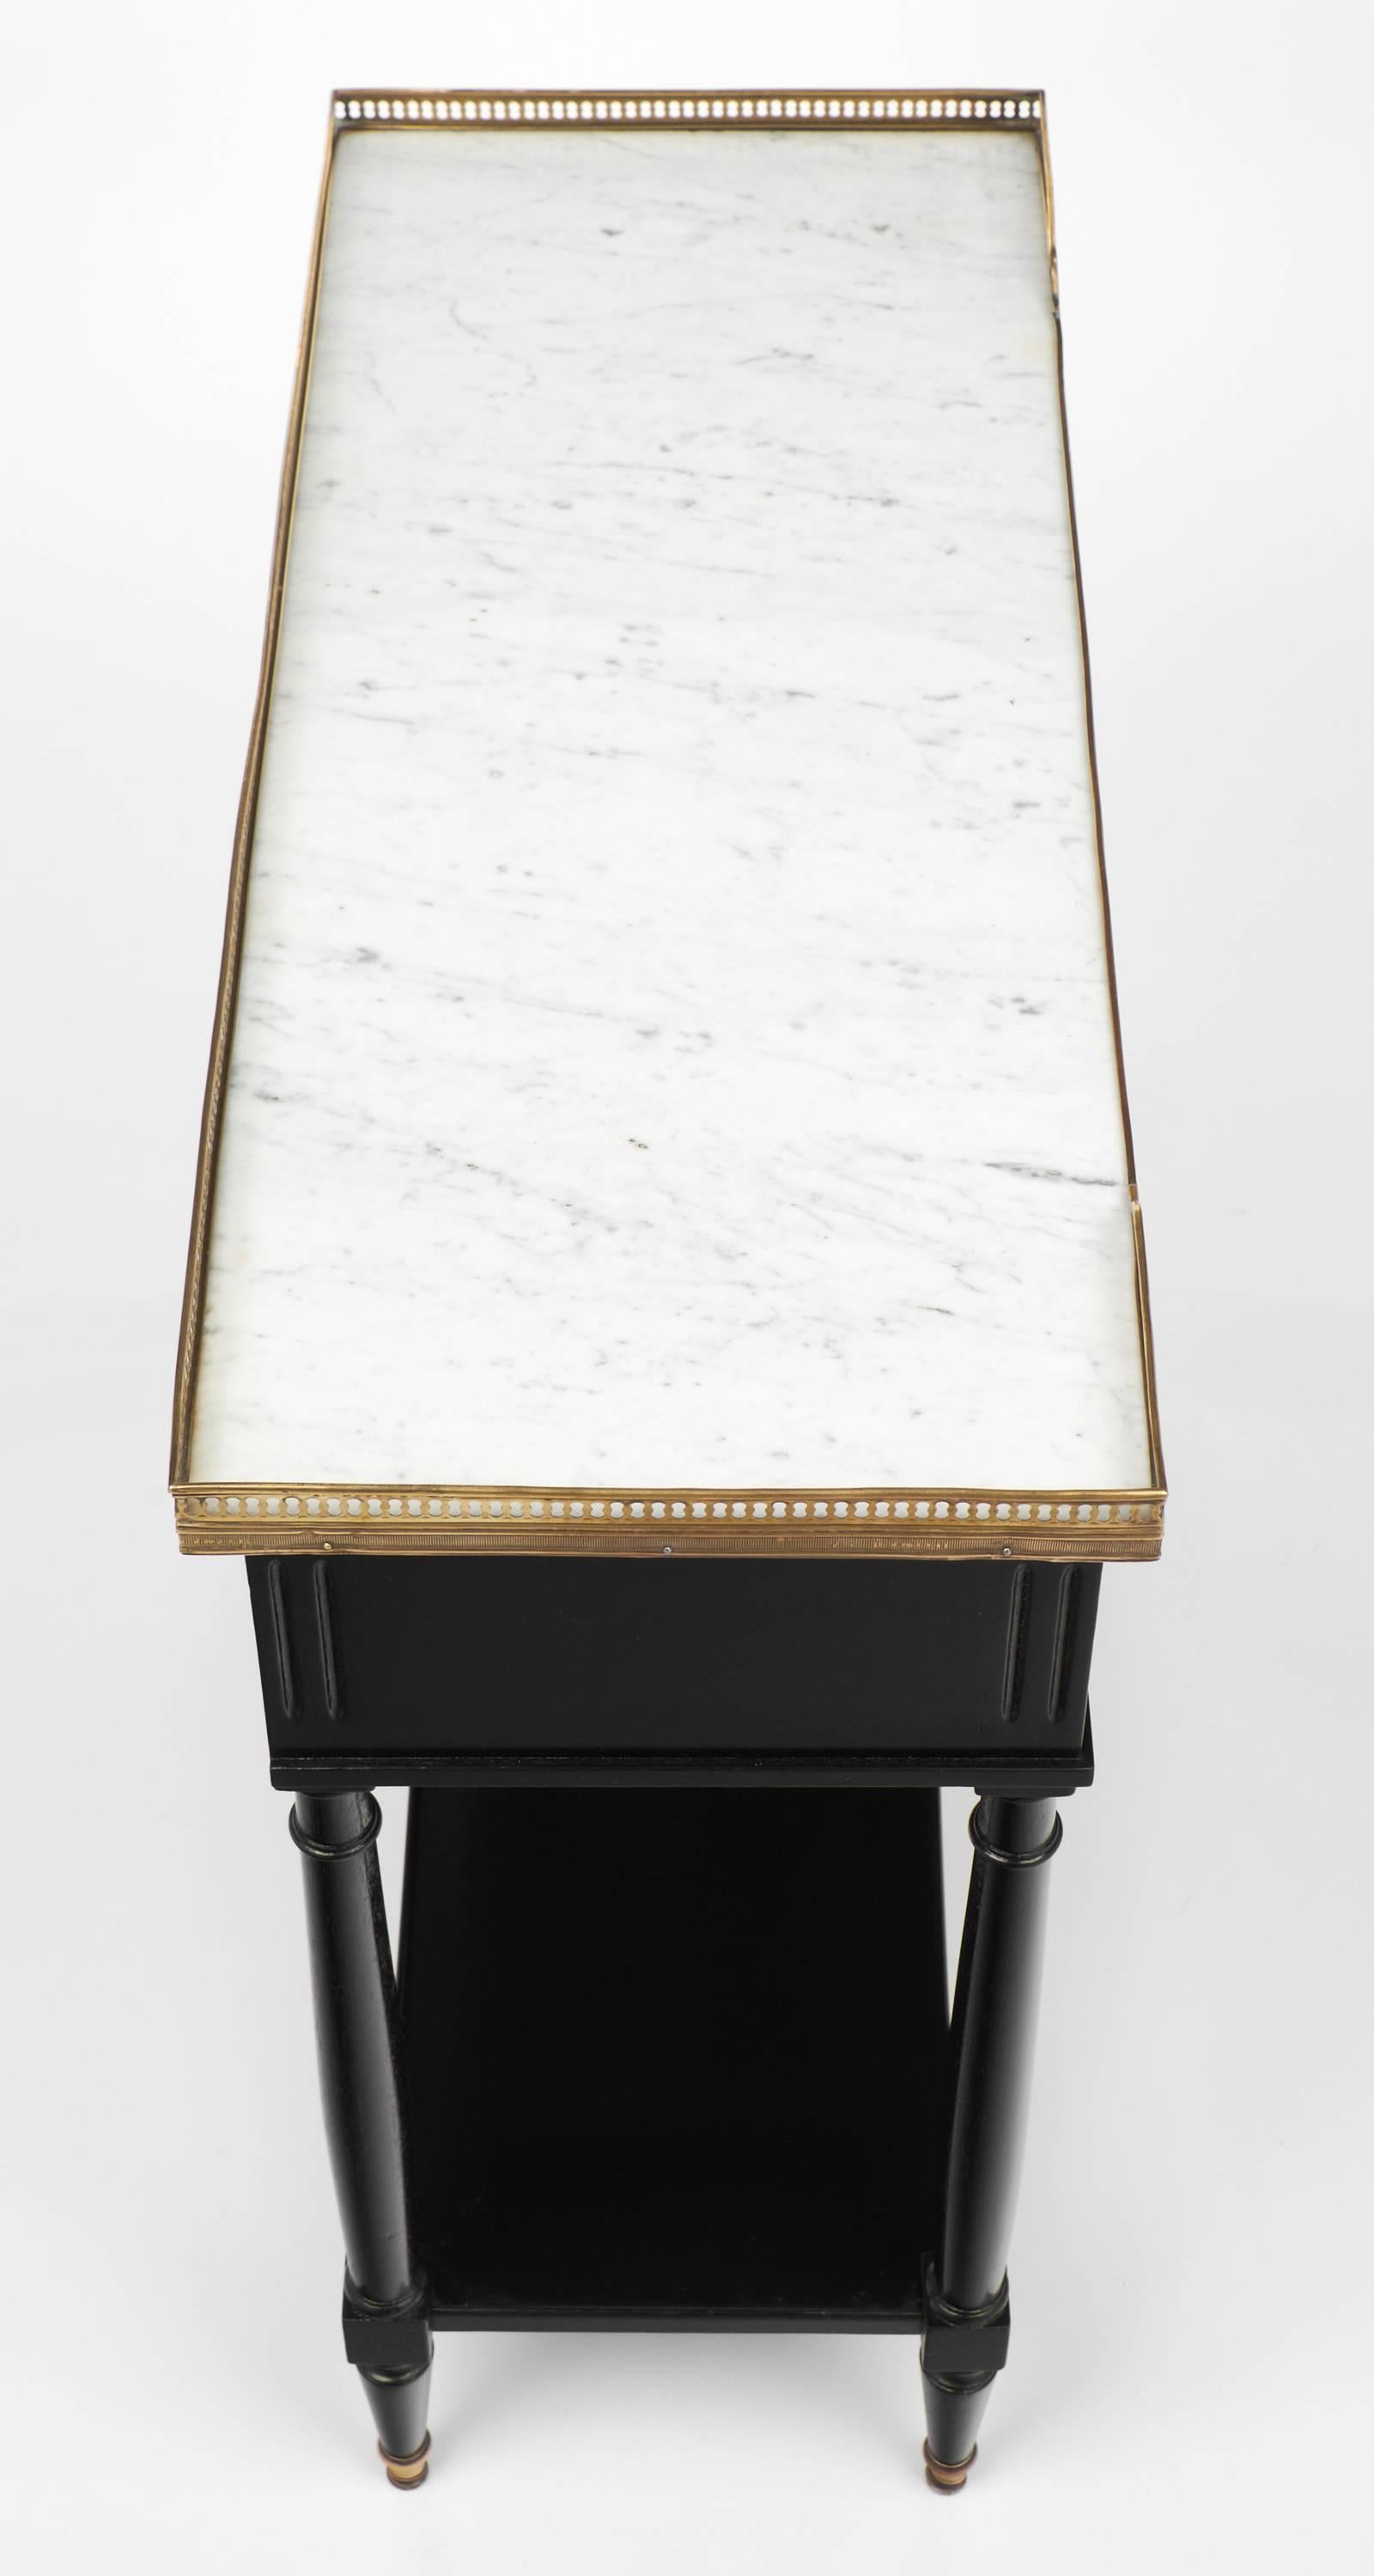 Late 19th Century French Louis XVI Marble-Top Console Table